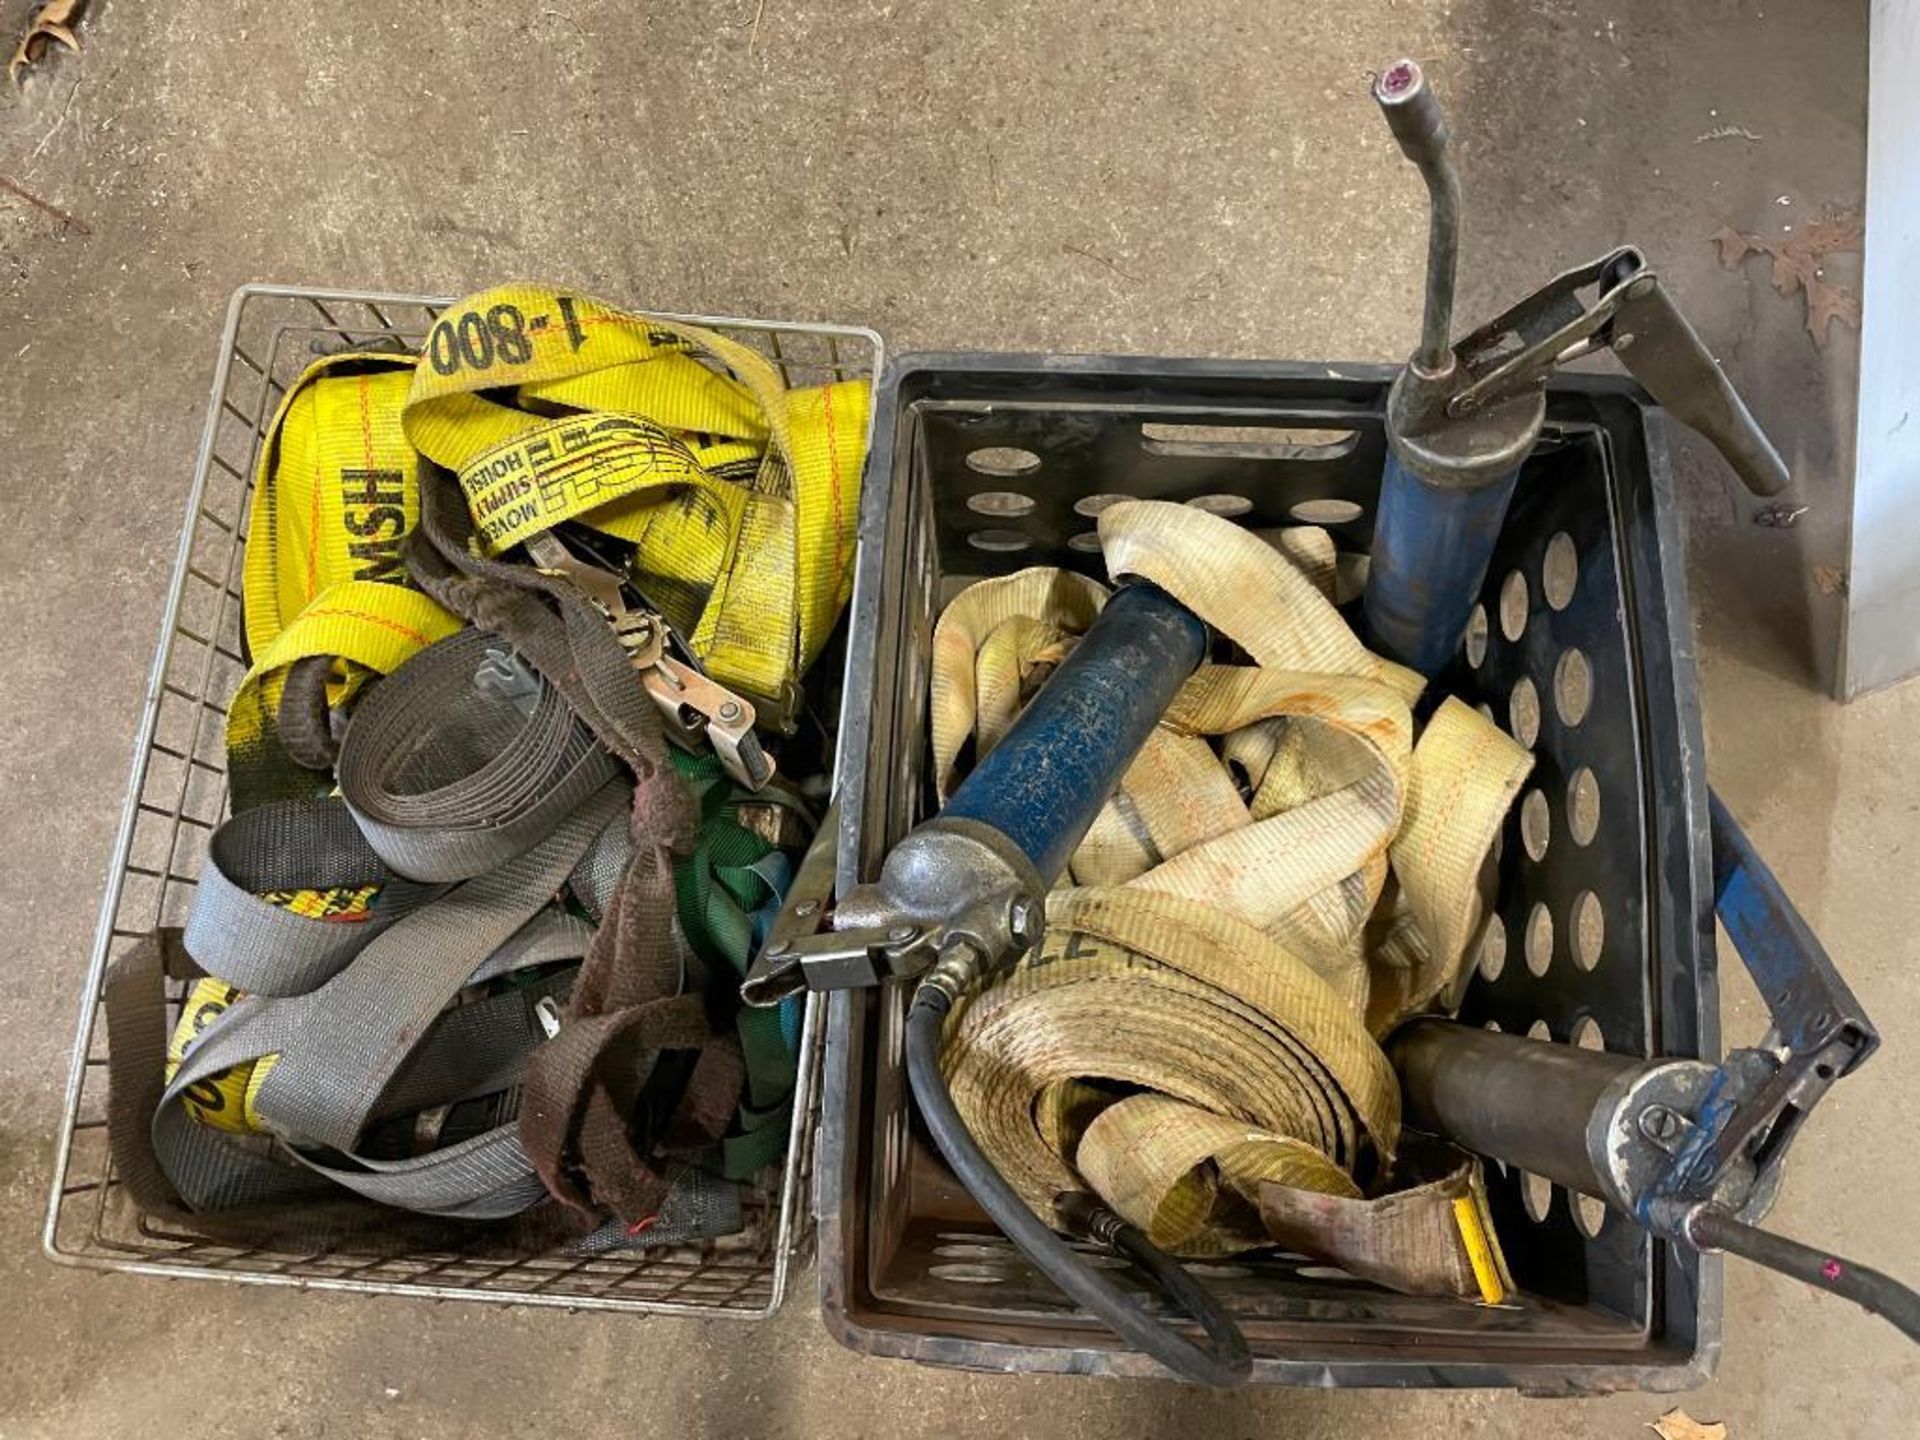 (LOT) OF HOIST STRAPS AND GREASE GUNS